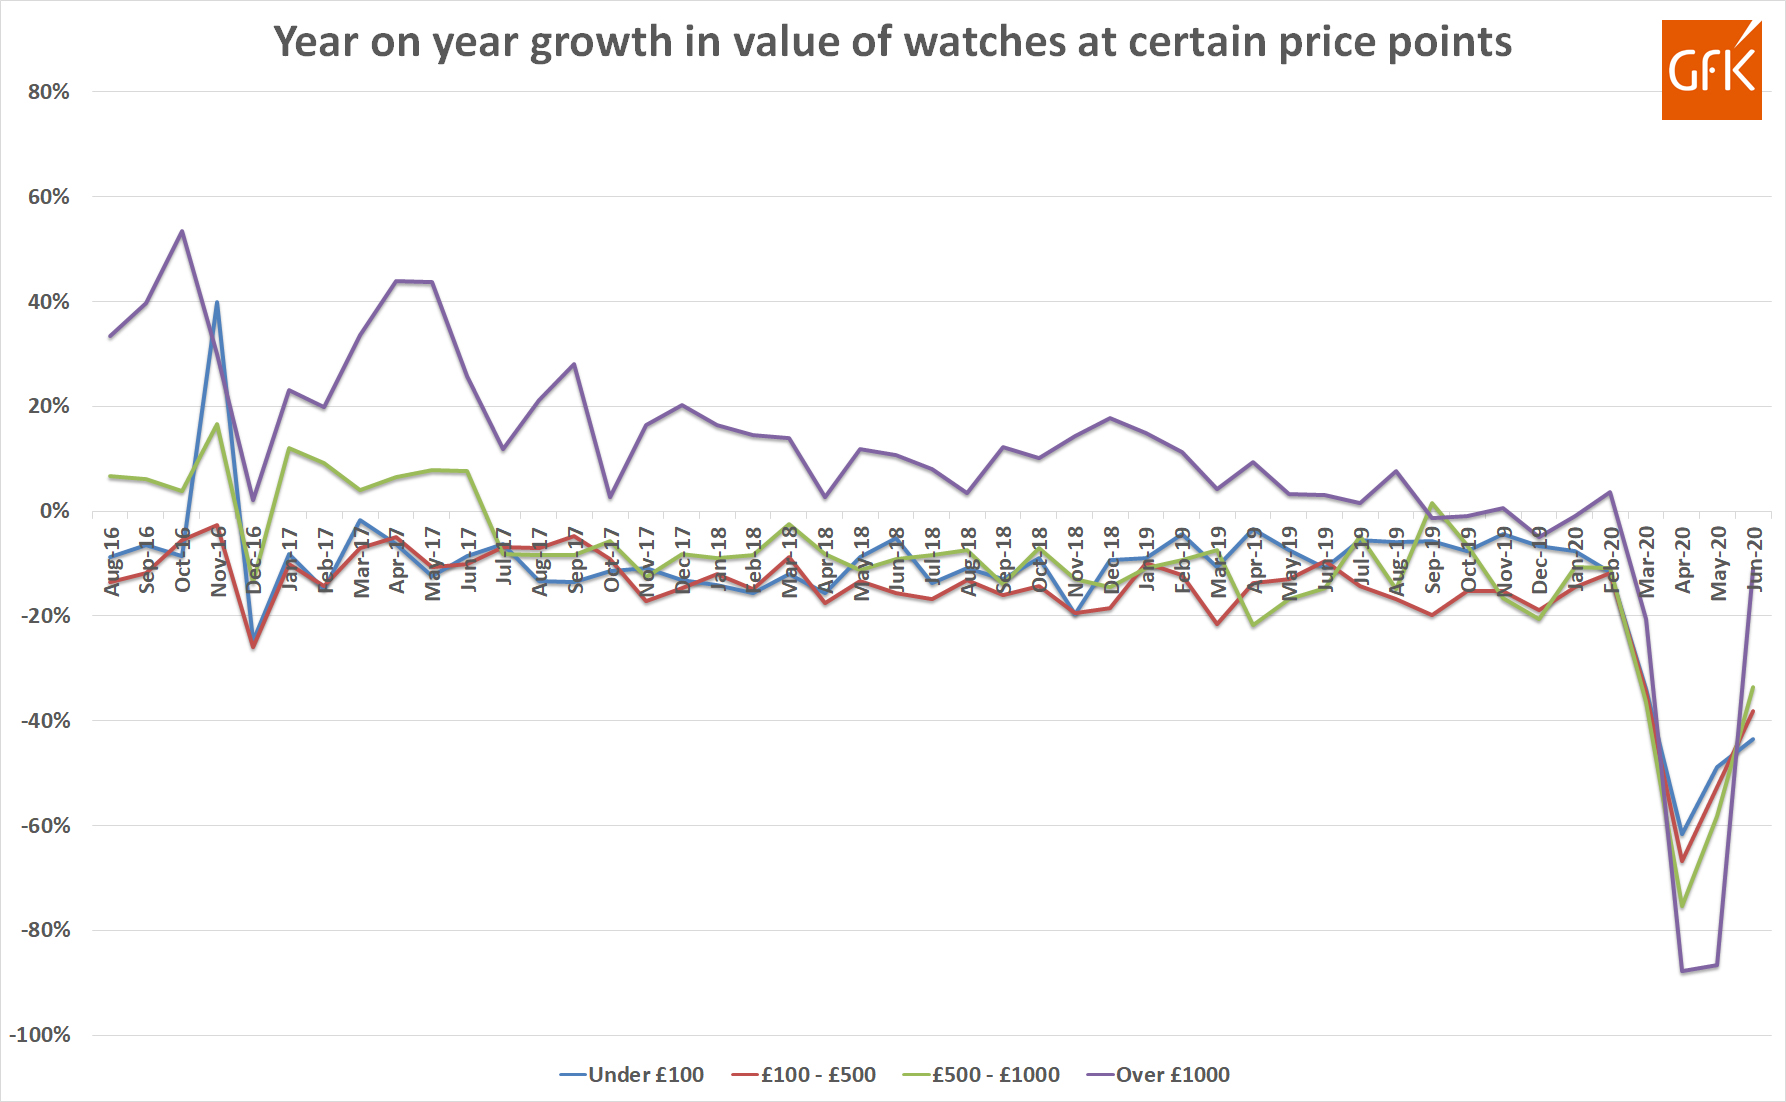 Gfk yoy growth in sales various price points